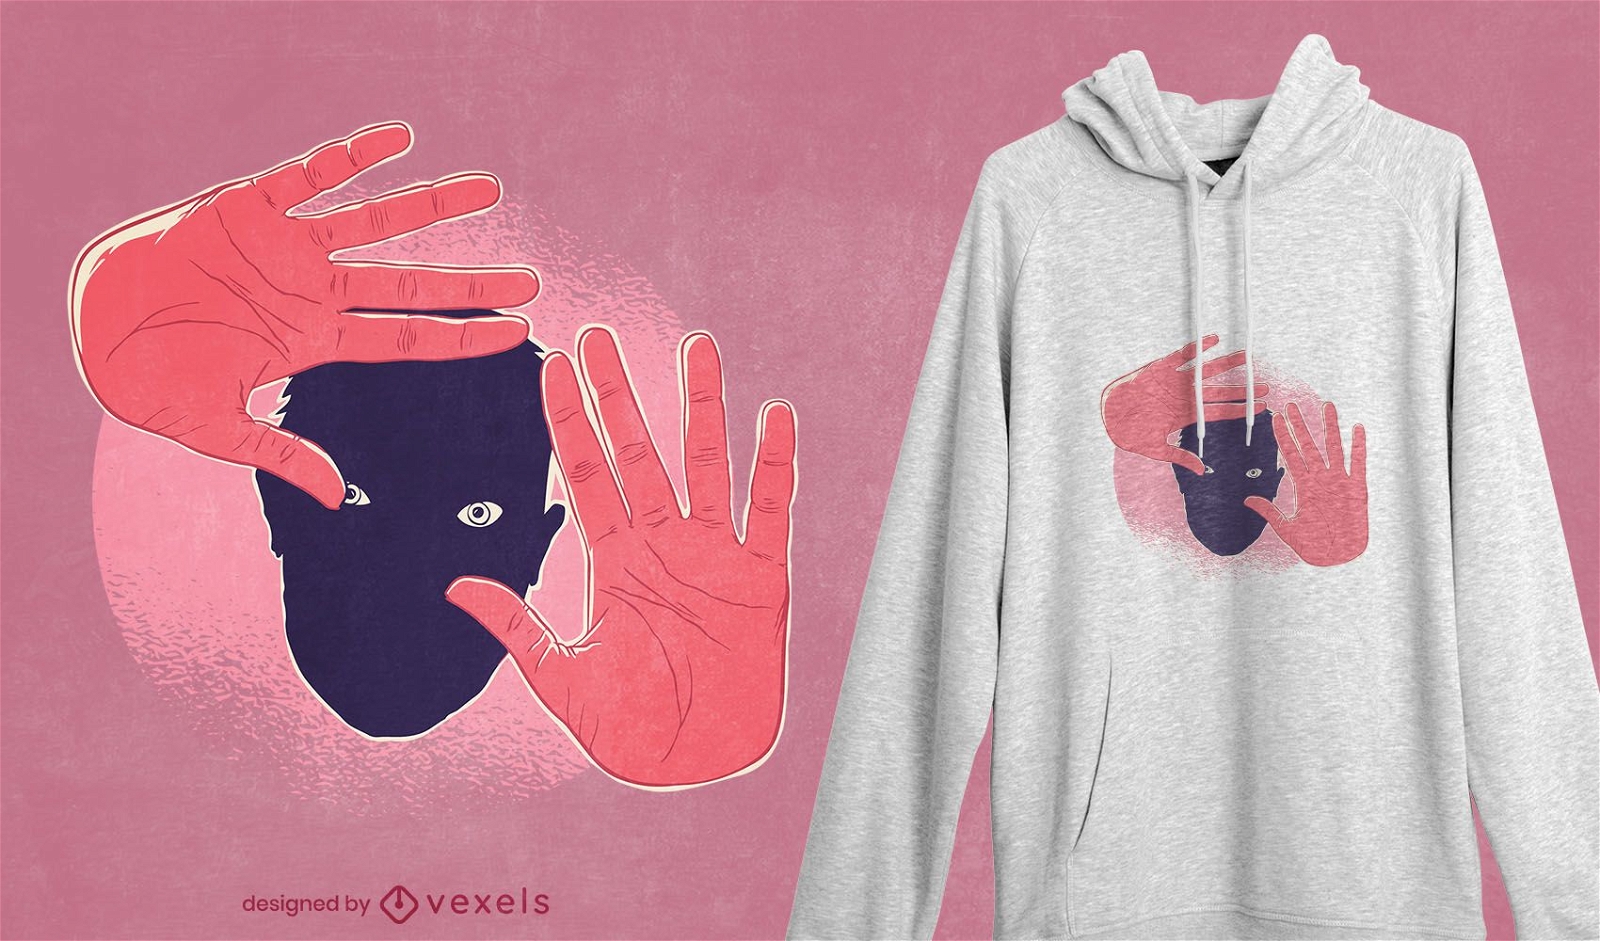 Hands and face t-shirt design